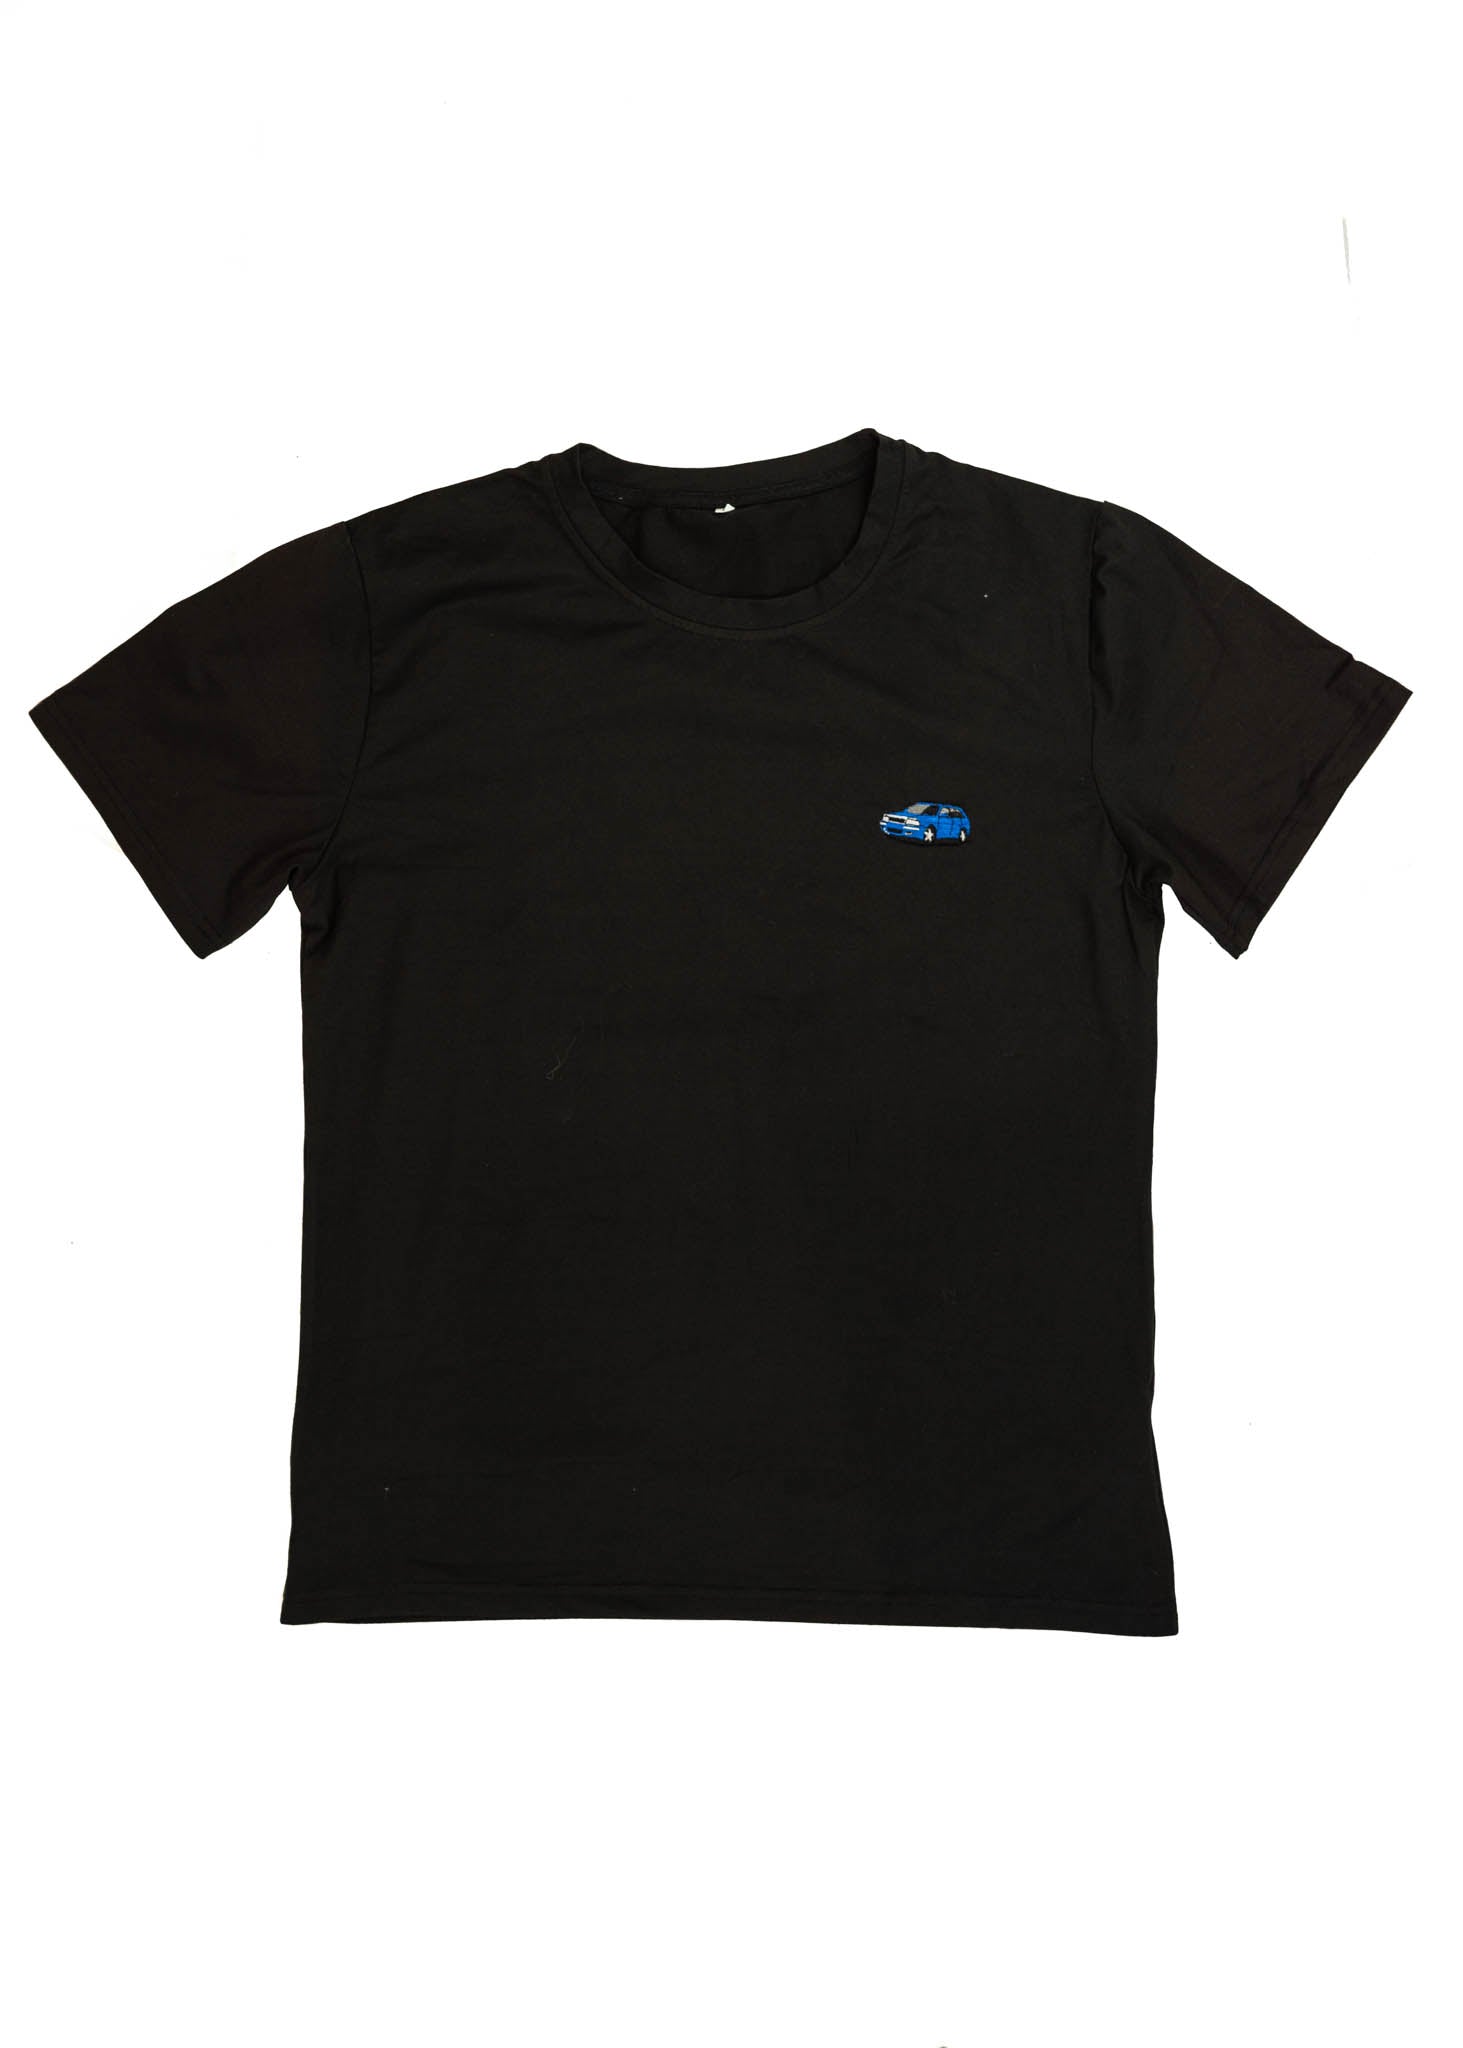 A black Audi t-shirt for men. Photo is a front view of the shirt with an embroidered a Nogaro Blue Audi 80 Avant made by Porsche. Fabric composition is 100% polyester. The material is very soft, stretchy, non-transparent. The style of this shirt is short sleeve, with a crewneck neckline.